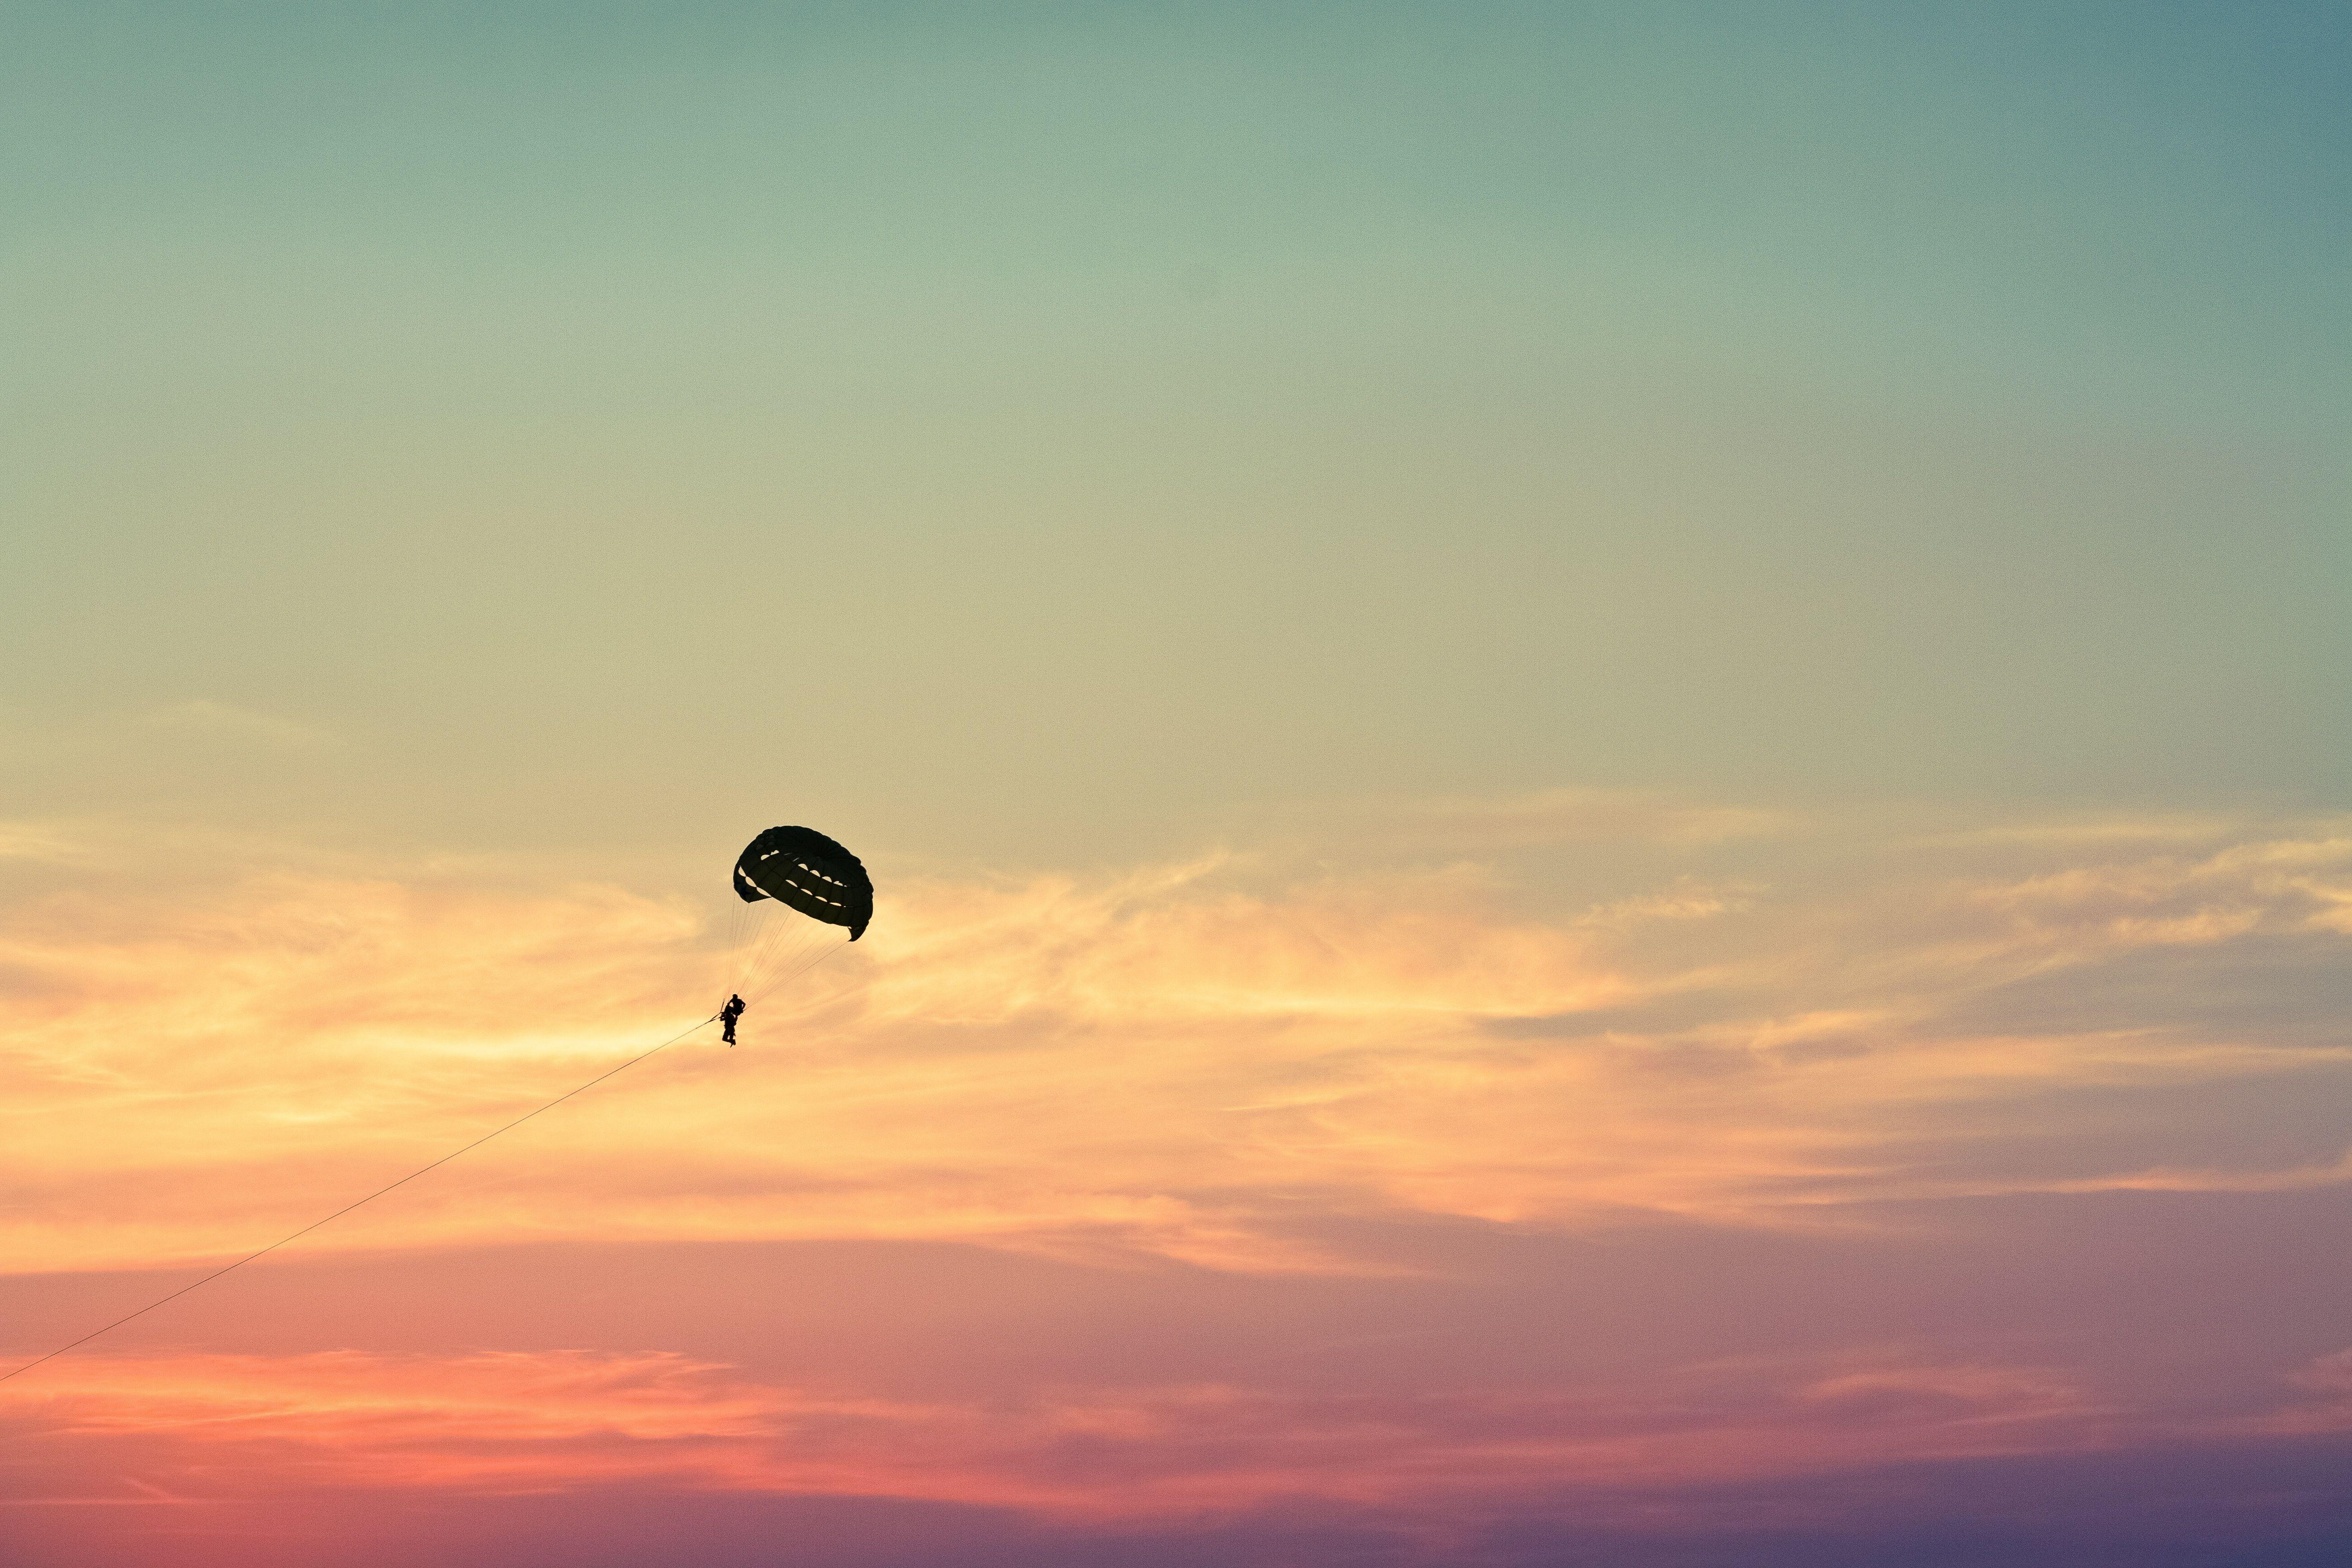 Wallpaper Parasailing, Paragliding, Flying, Sky HD, Picture, Image